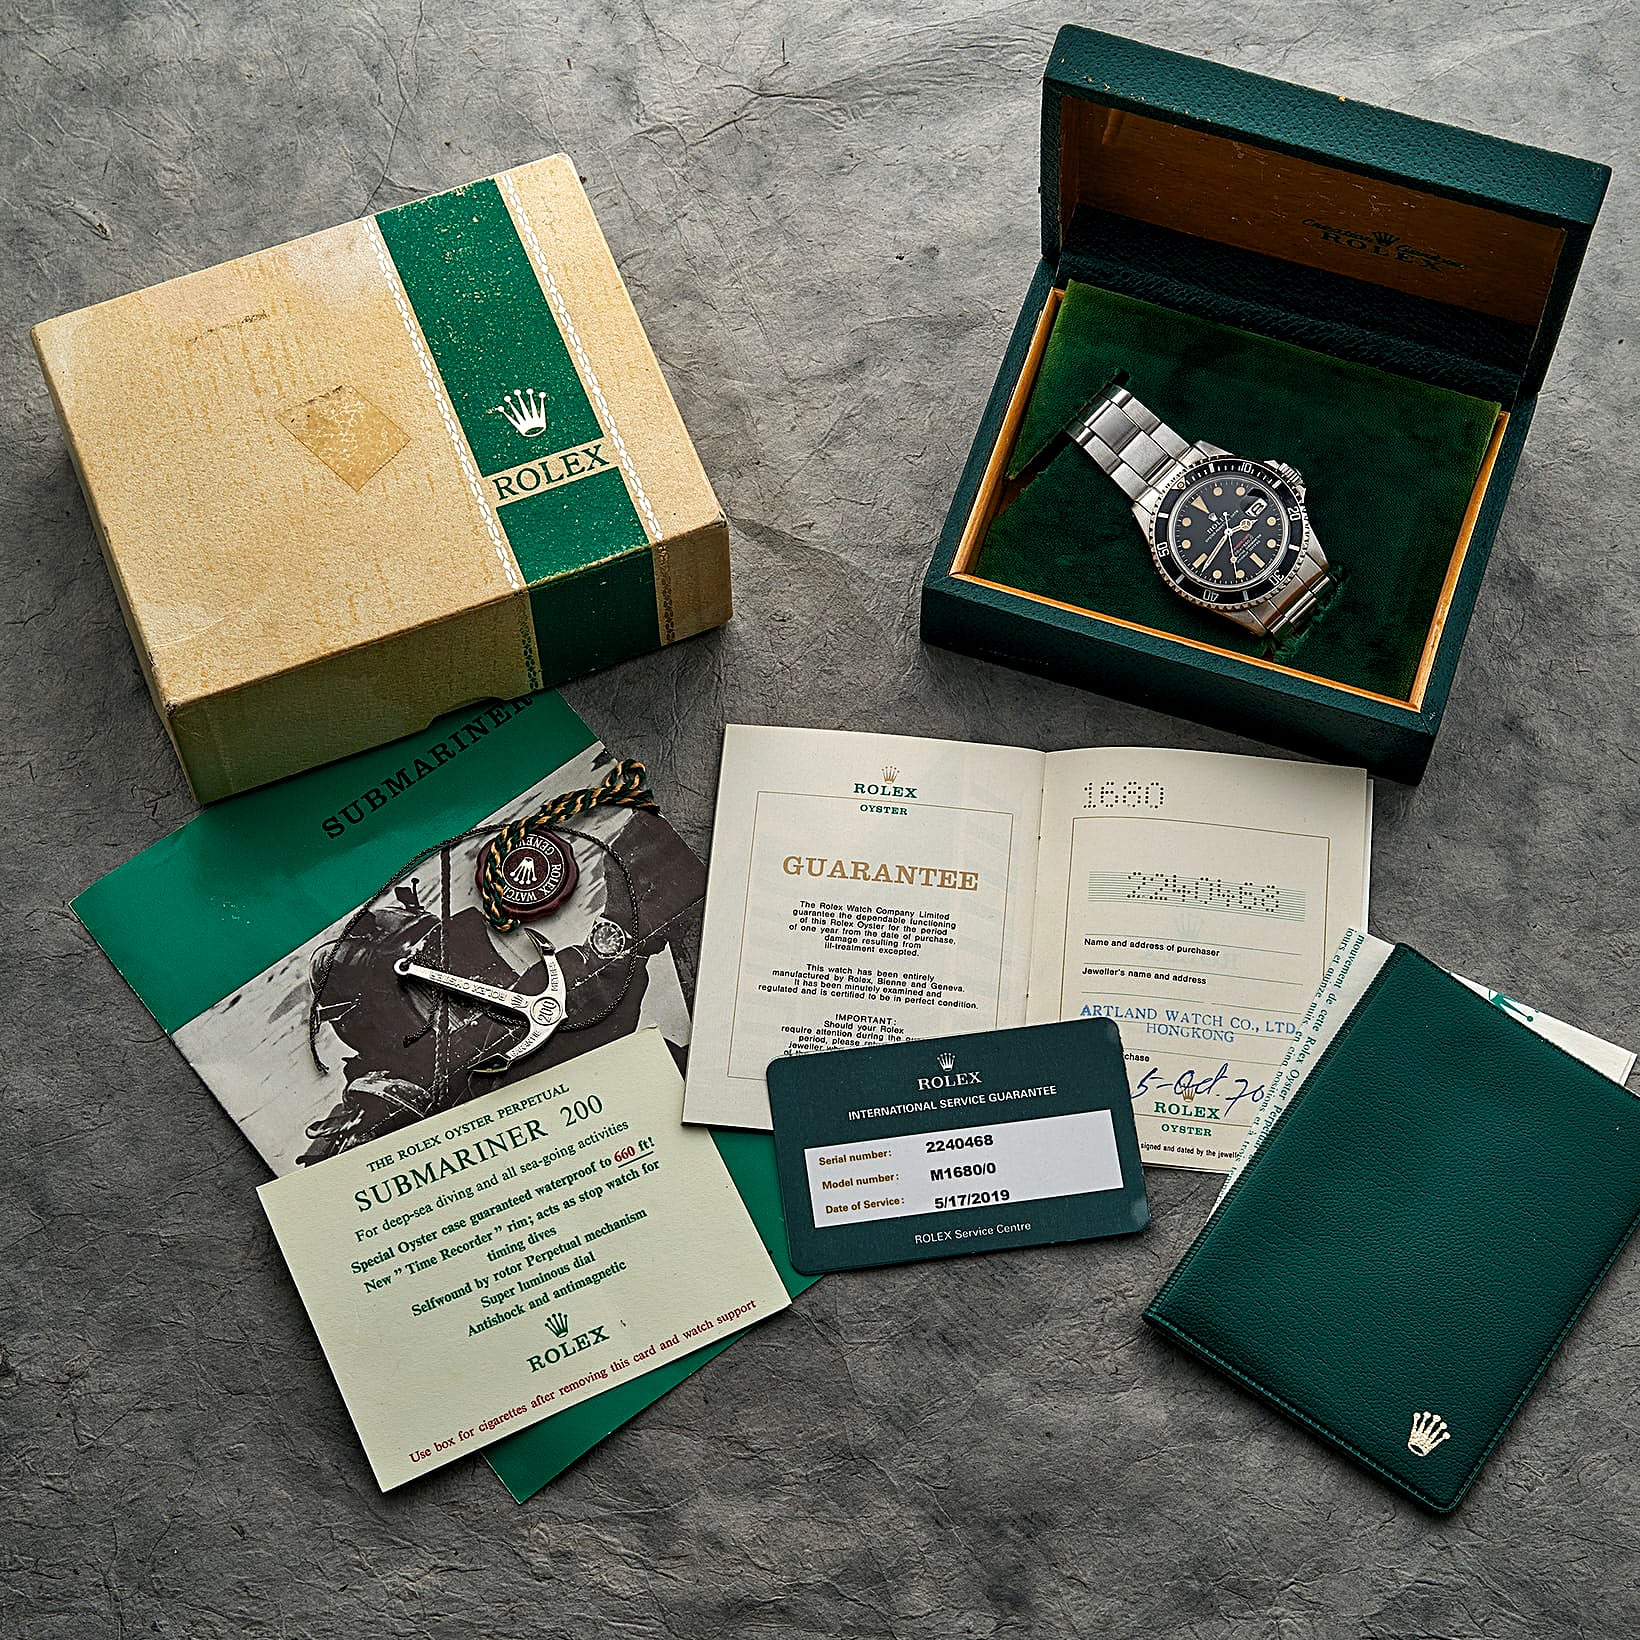 Rolex Submariner ref. 16610 LV Box & Papers - Vintage Watches - Stefano  Mazzariol